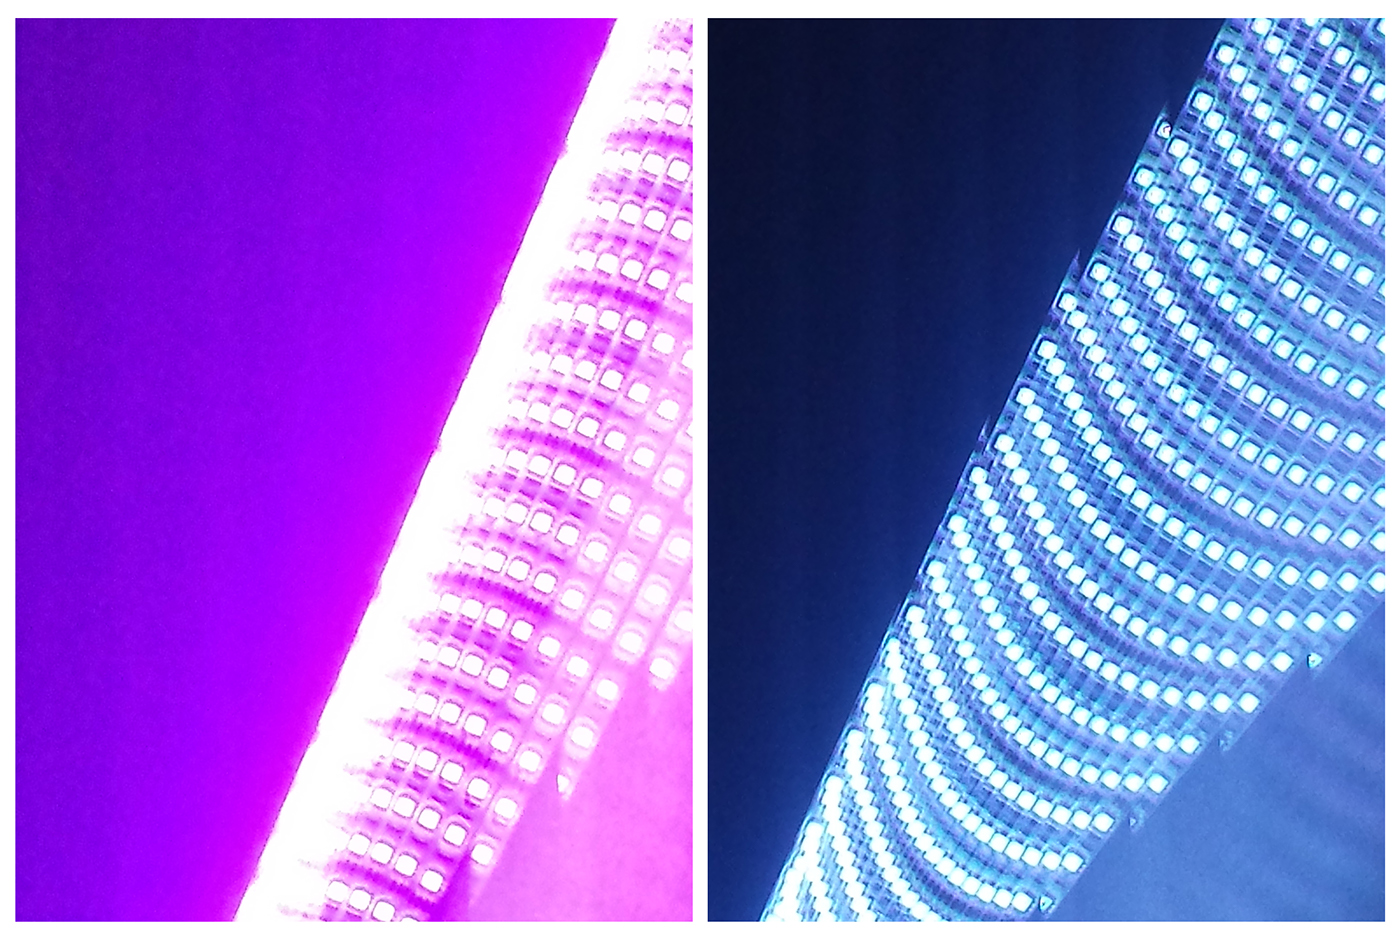 light scultpure lights digital cool Fun exciting MMM woah prints purple red strawberry strawberries album cover?